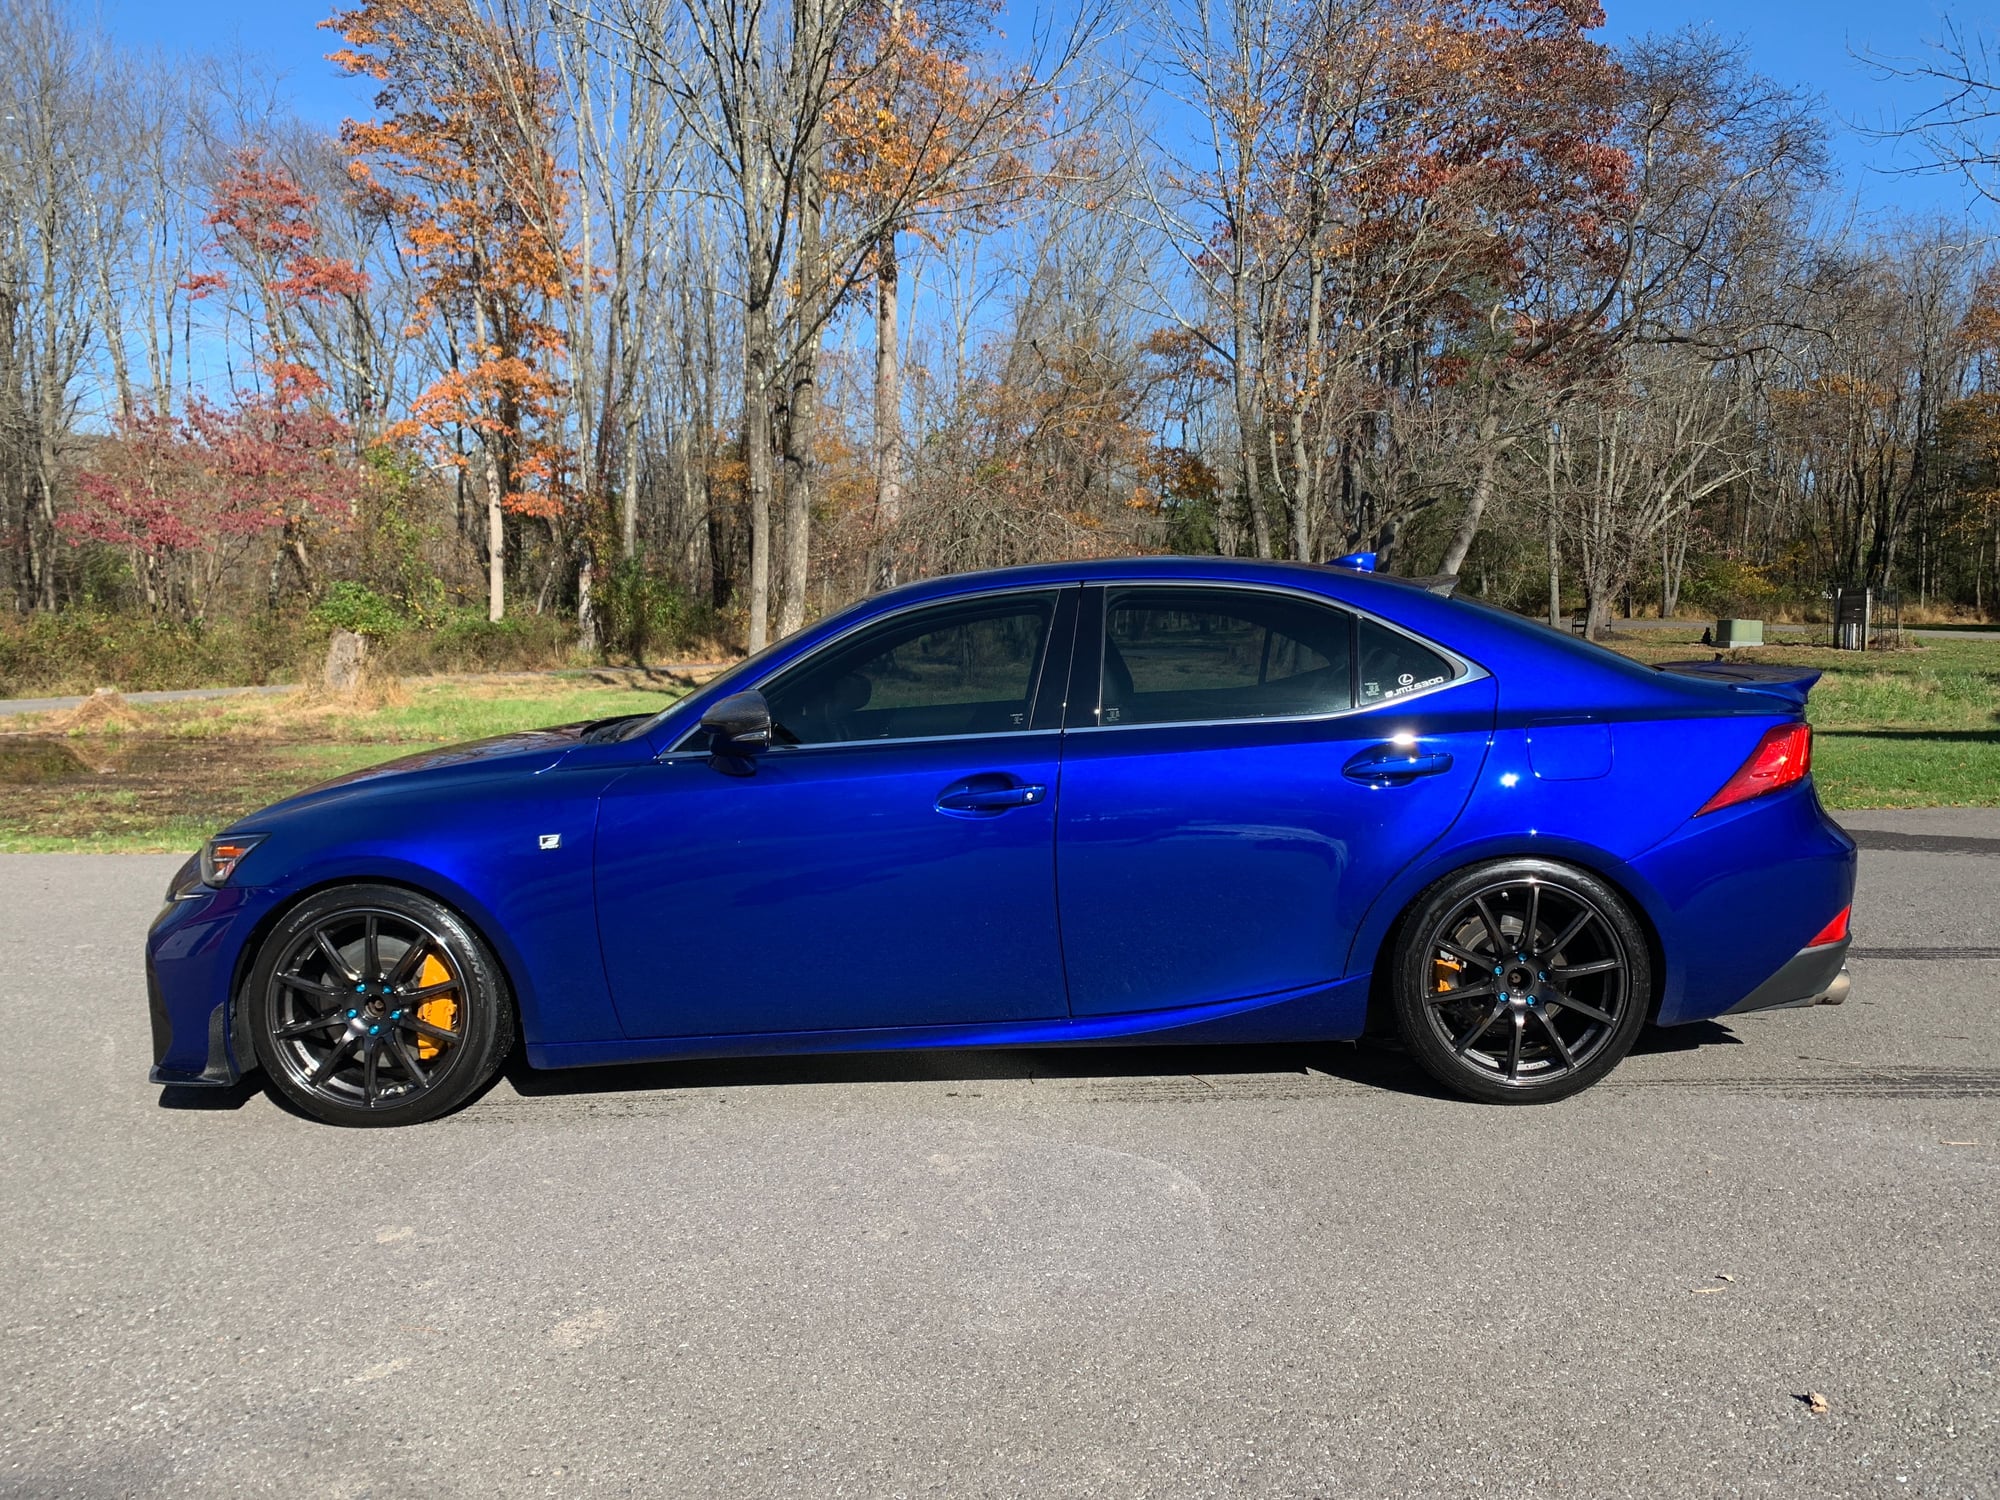 Wheels and Tires/Axles - Rays 57transcend wheels - Used - 2017 Lexus All Models - 2016 Lexus IS200t - 2014 to 2015 Lexus IS250 - 2016 to 2019 Lexus IS300 - 2014 to 2019 Lexus IS350 - Milford, NJ 08848, United States